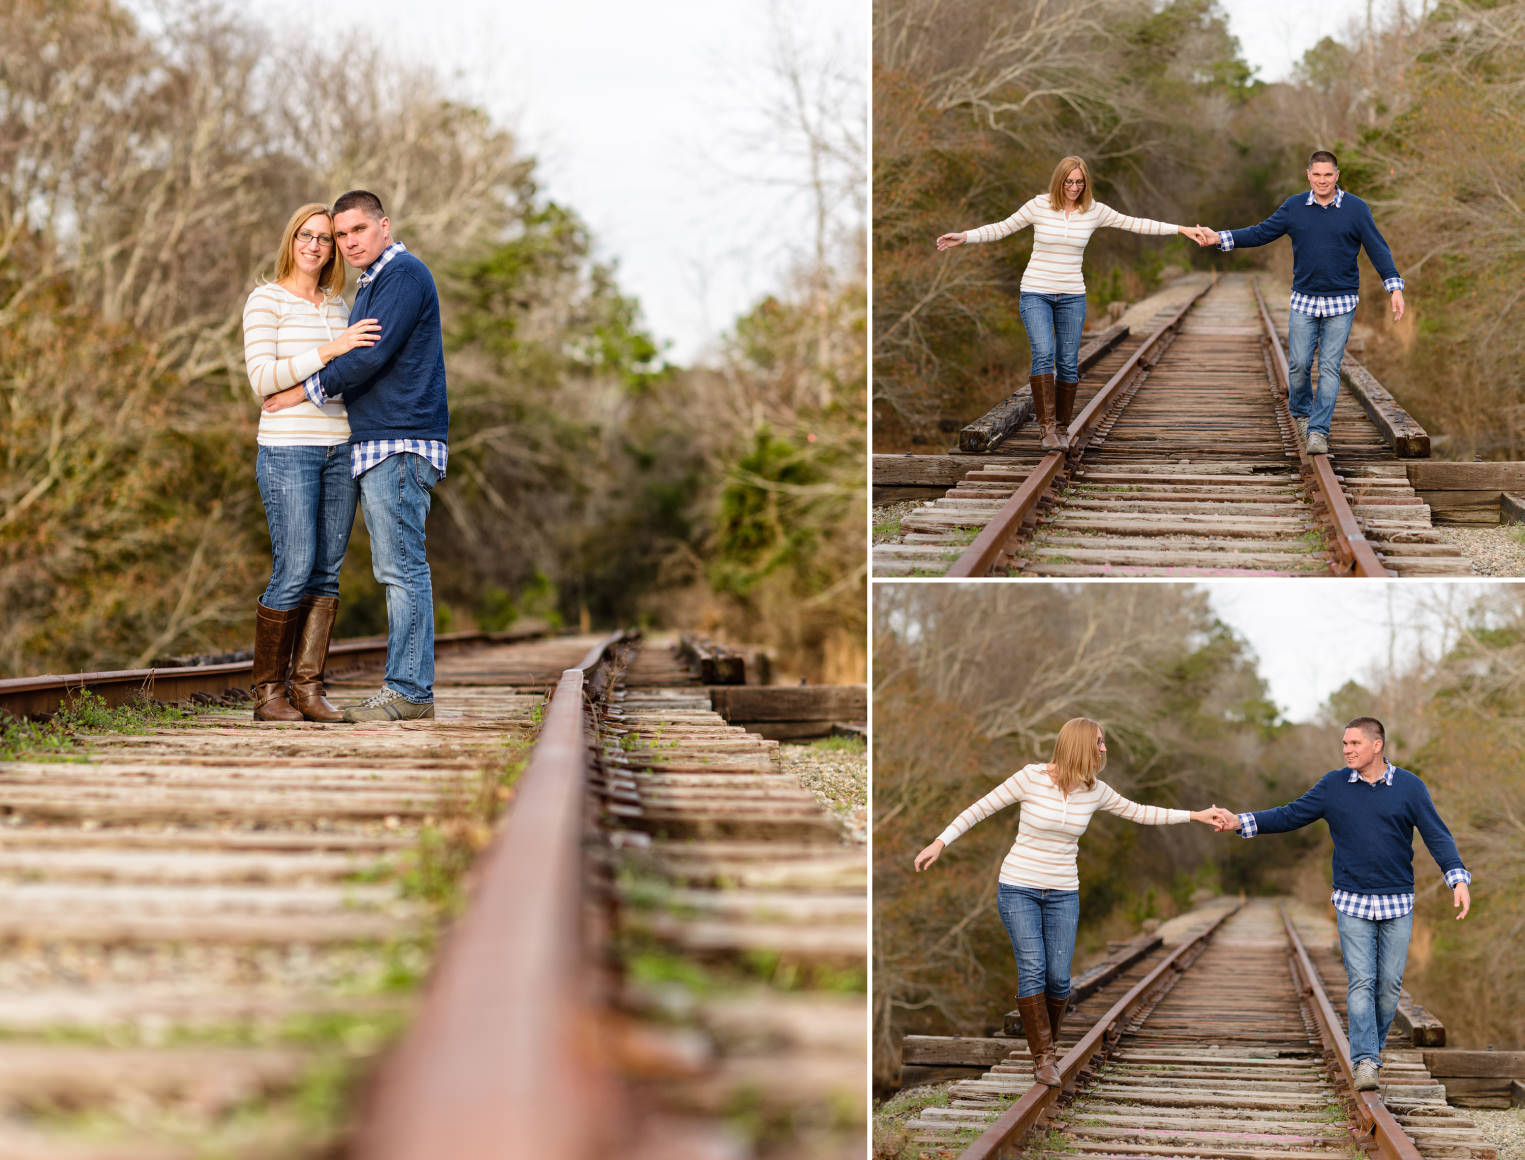 Getting a different angle on the train tracks - engagement at Conway River Walk